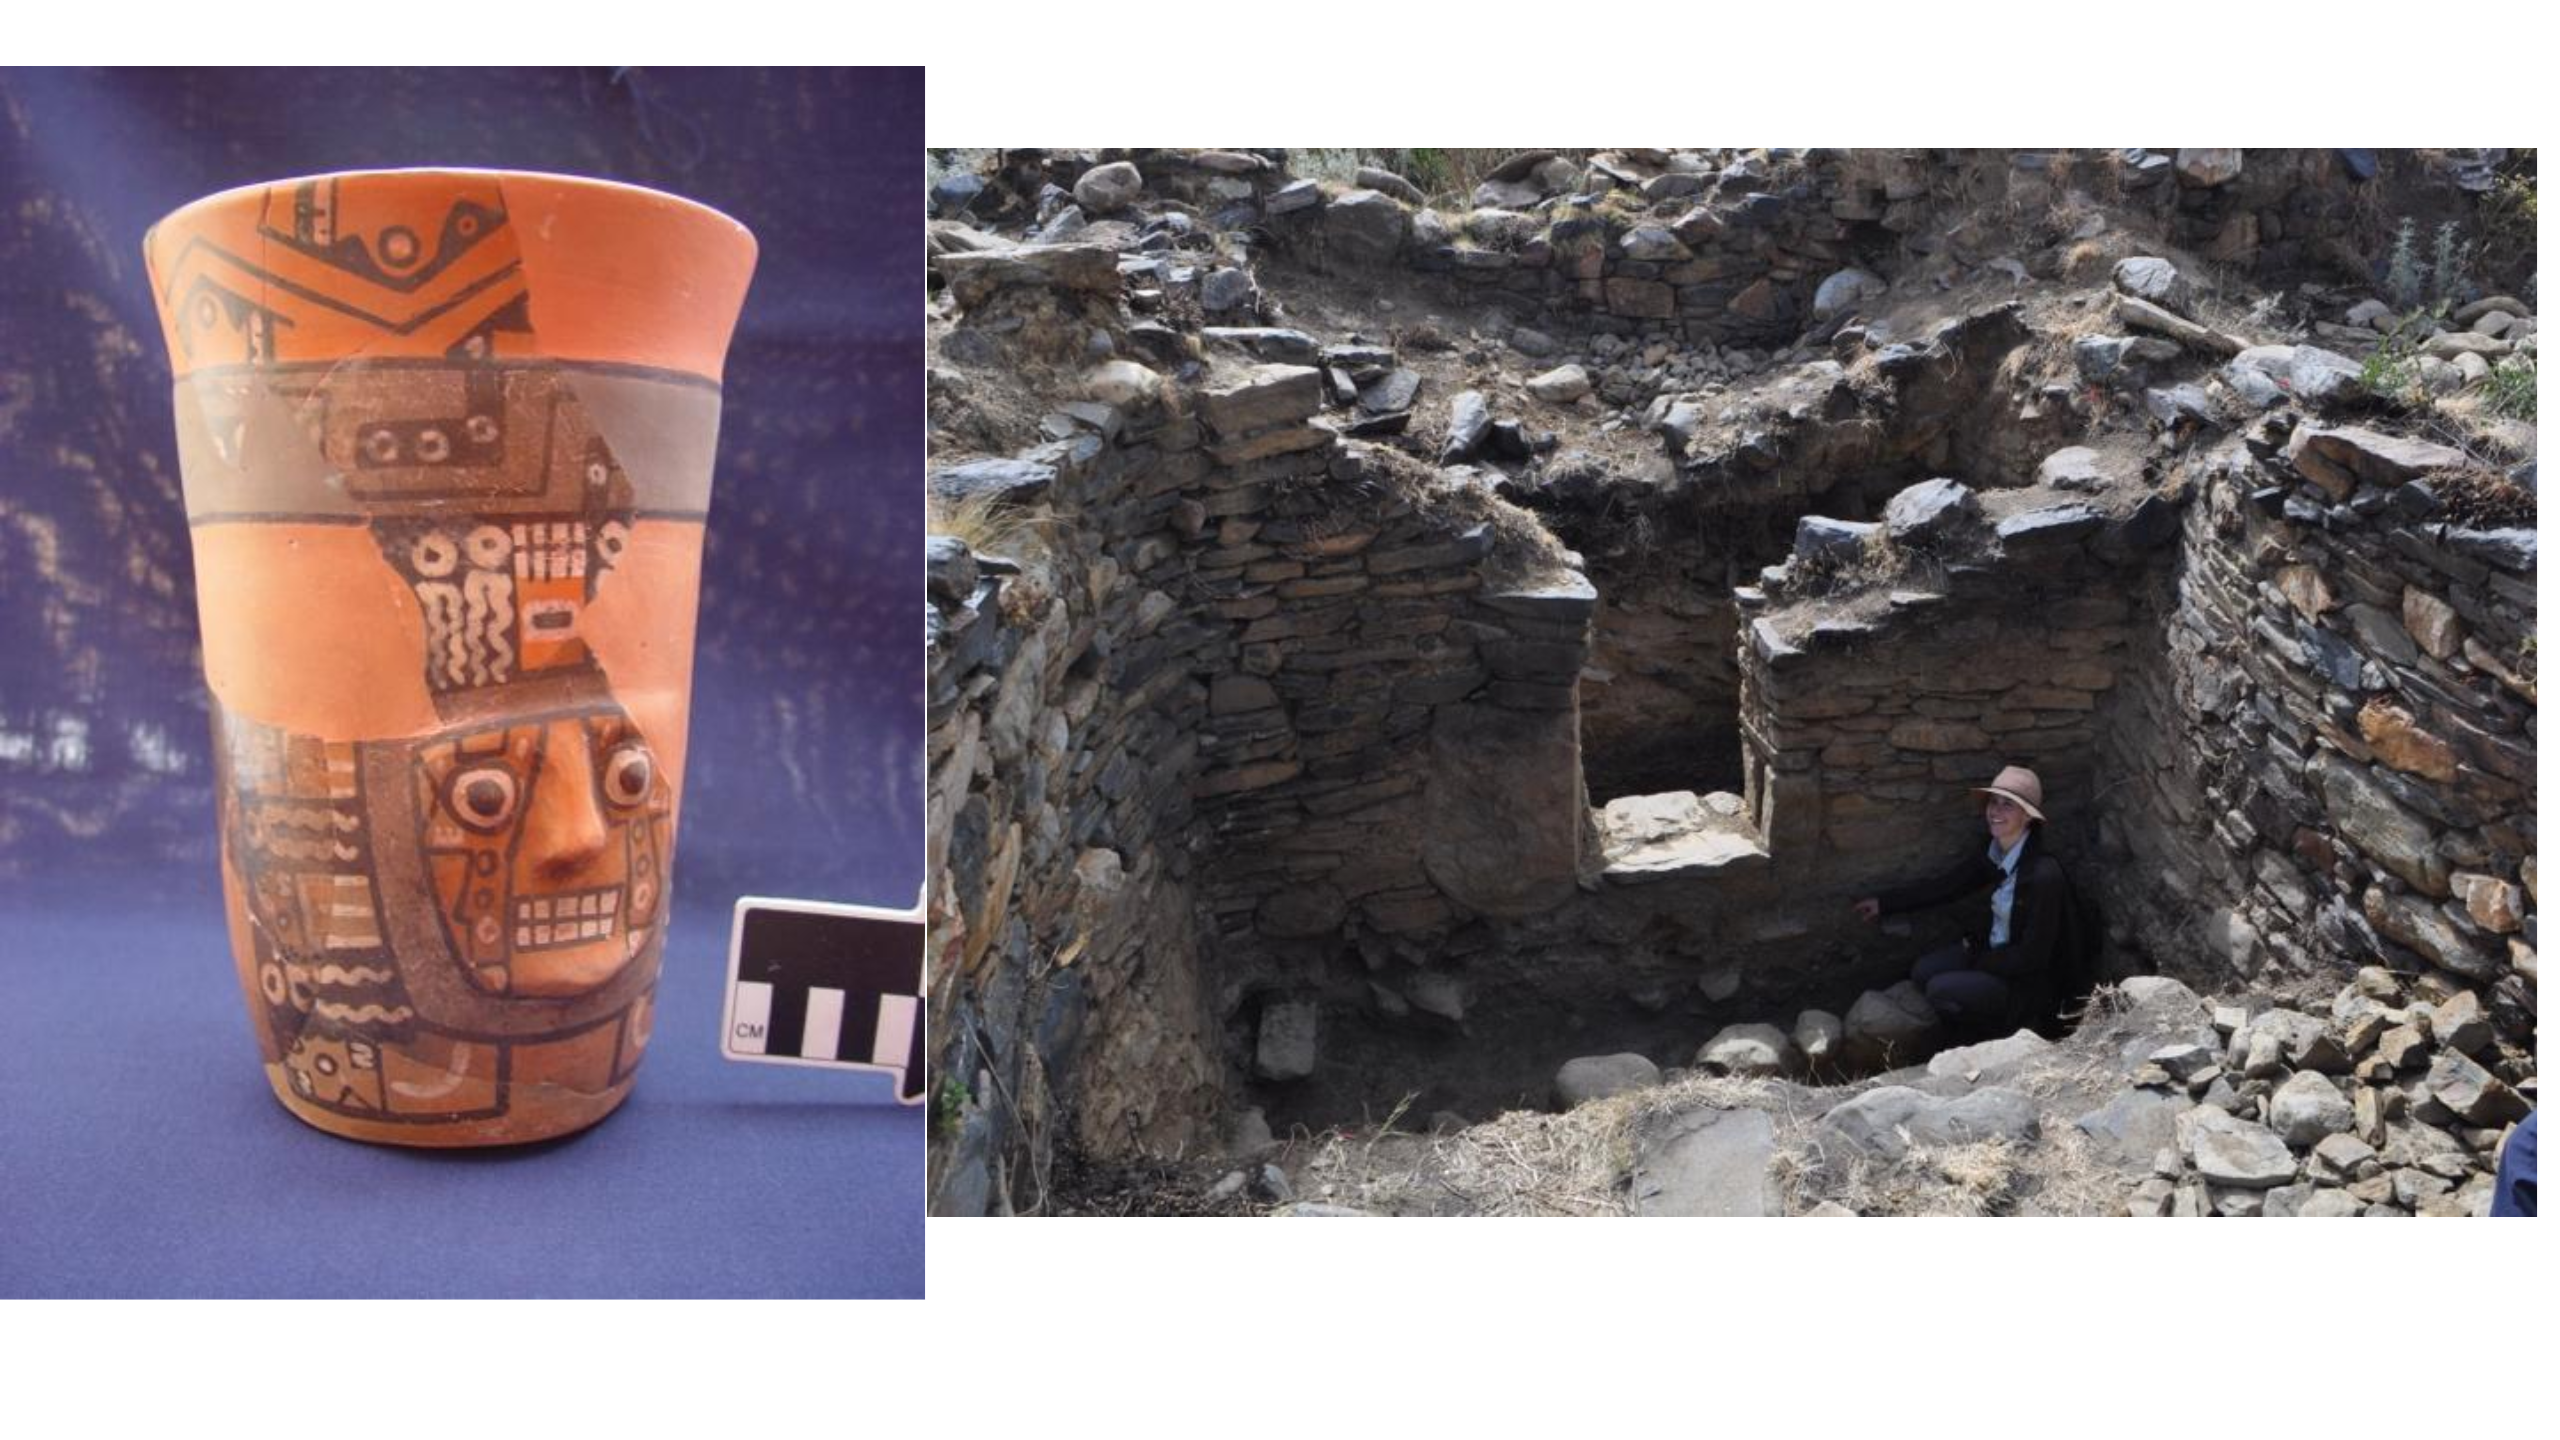 L.,Example ceramic drinking cup. Terra cotta colored, with black painted designs, including a face. Right: A person stands inside an ancient ruins an archaeological site.